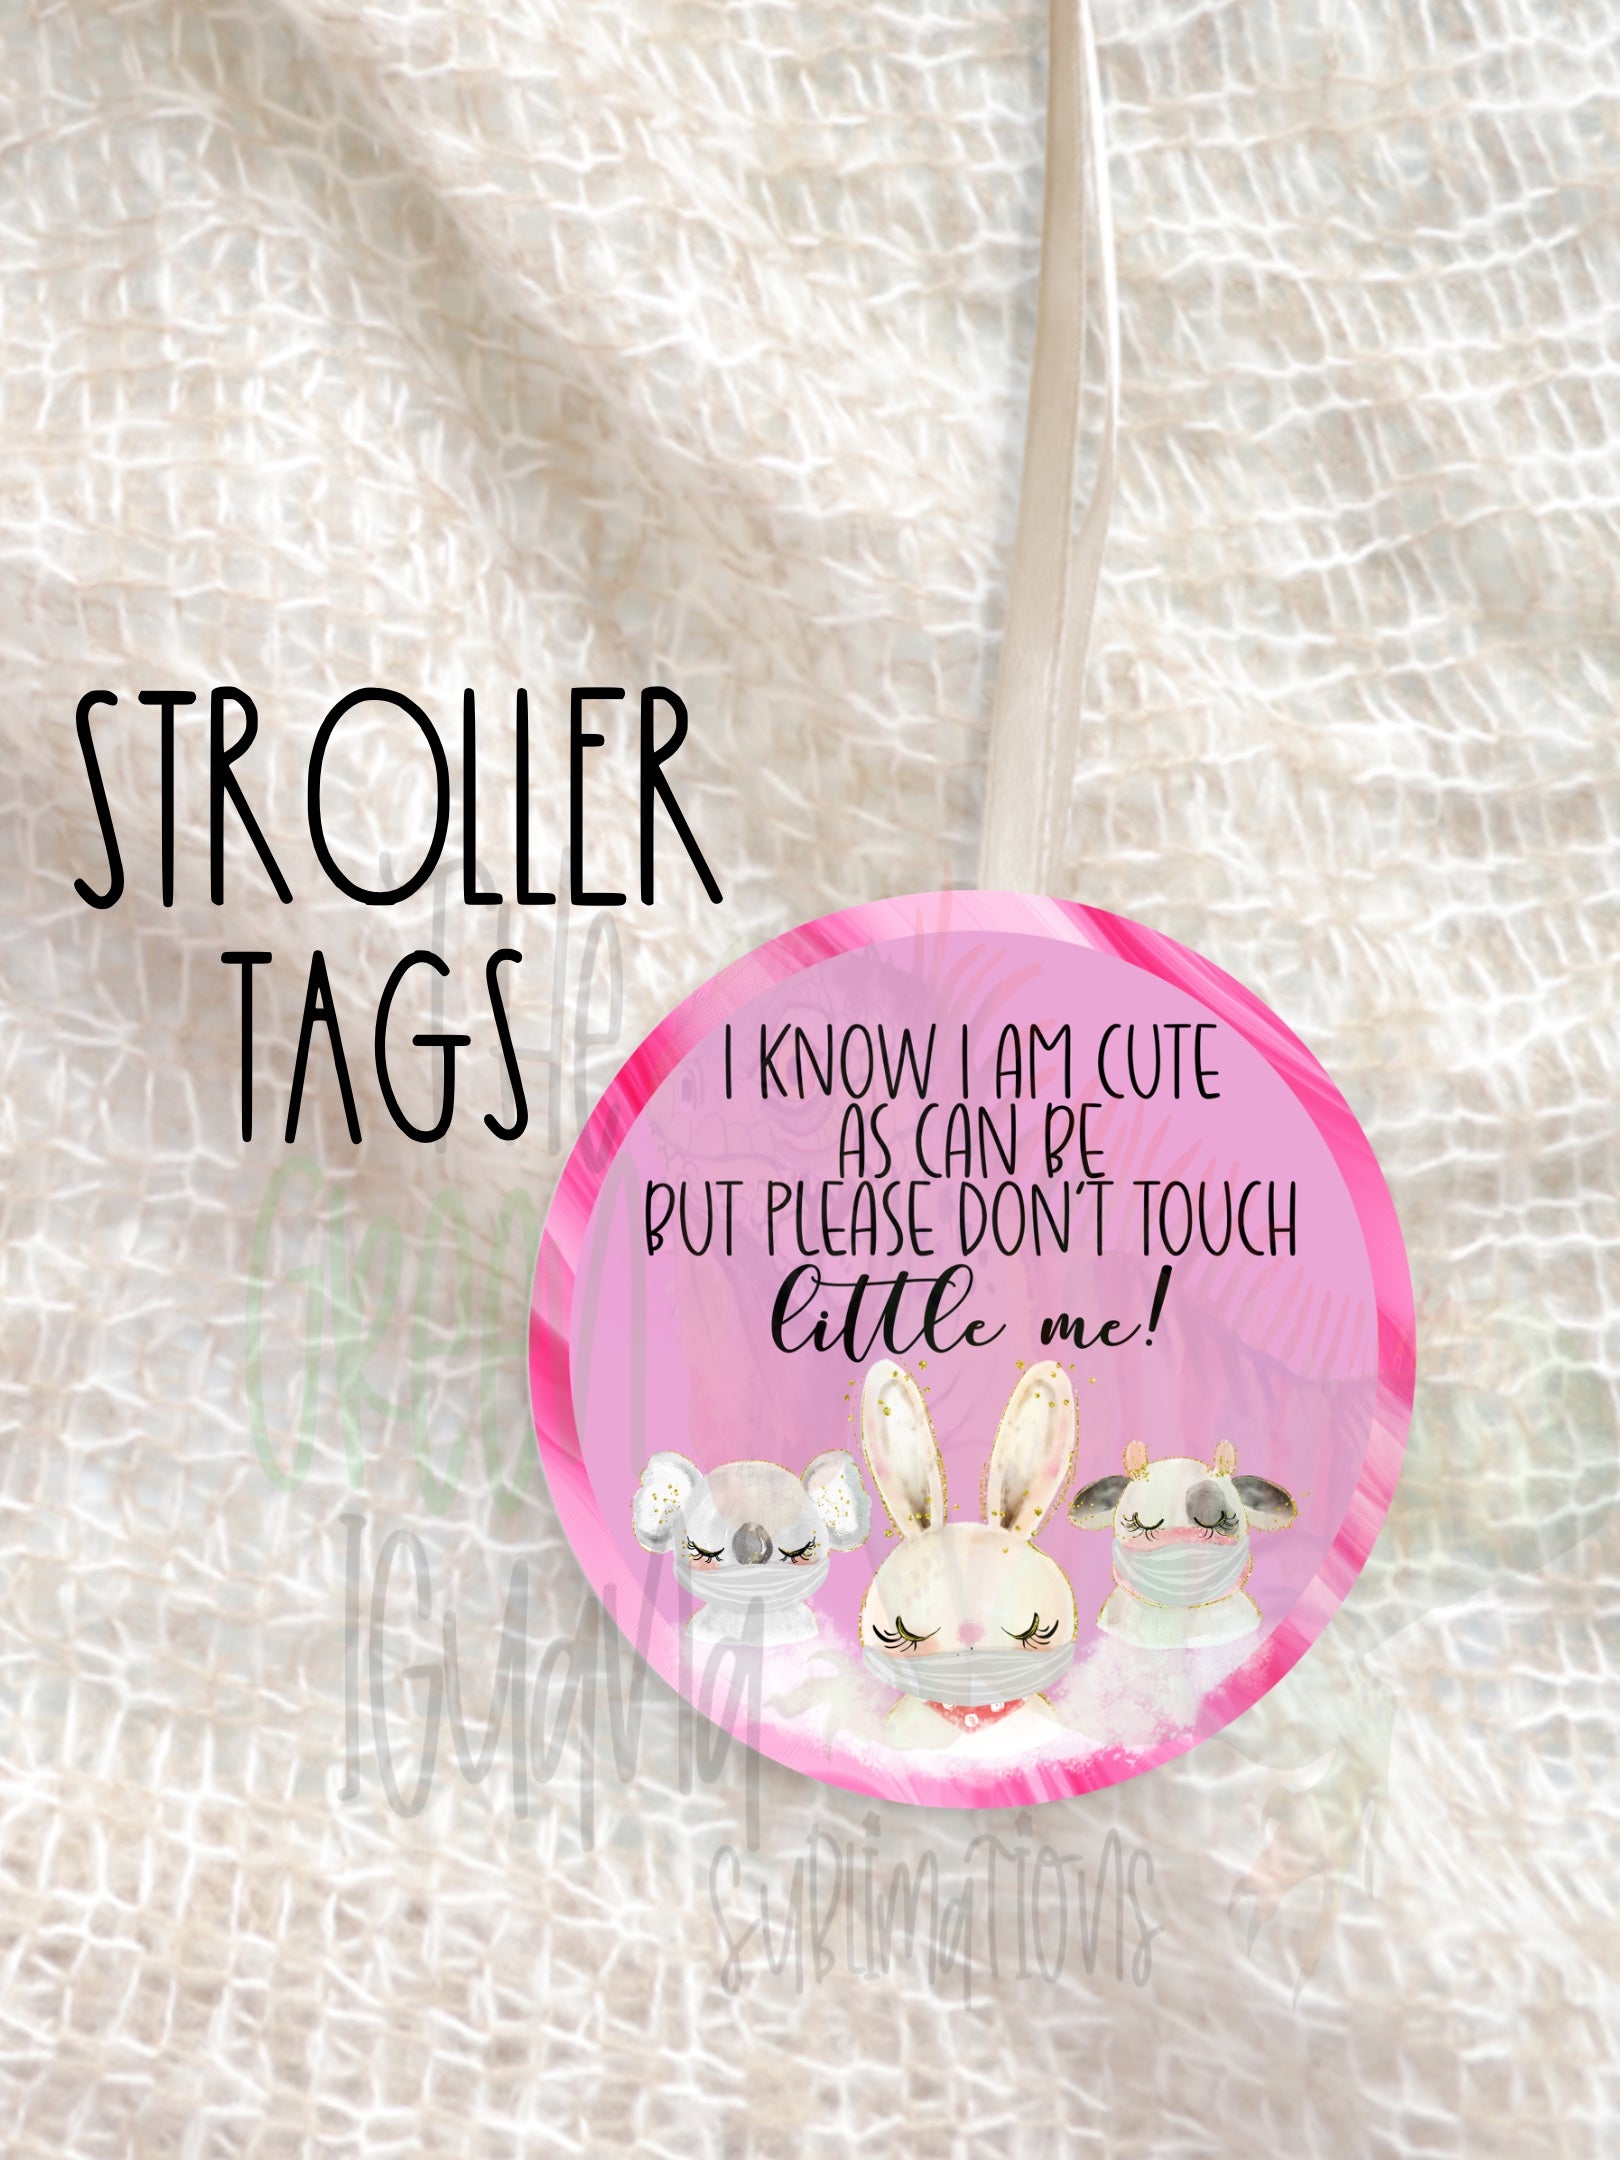 I know I am cute as can be (animals wearing masks) - Stroller tag